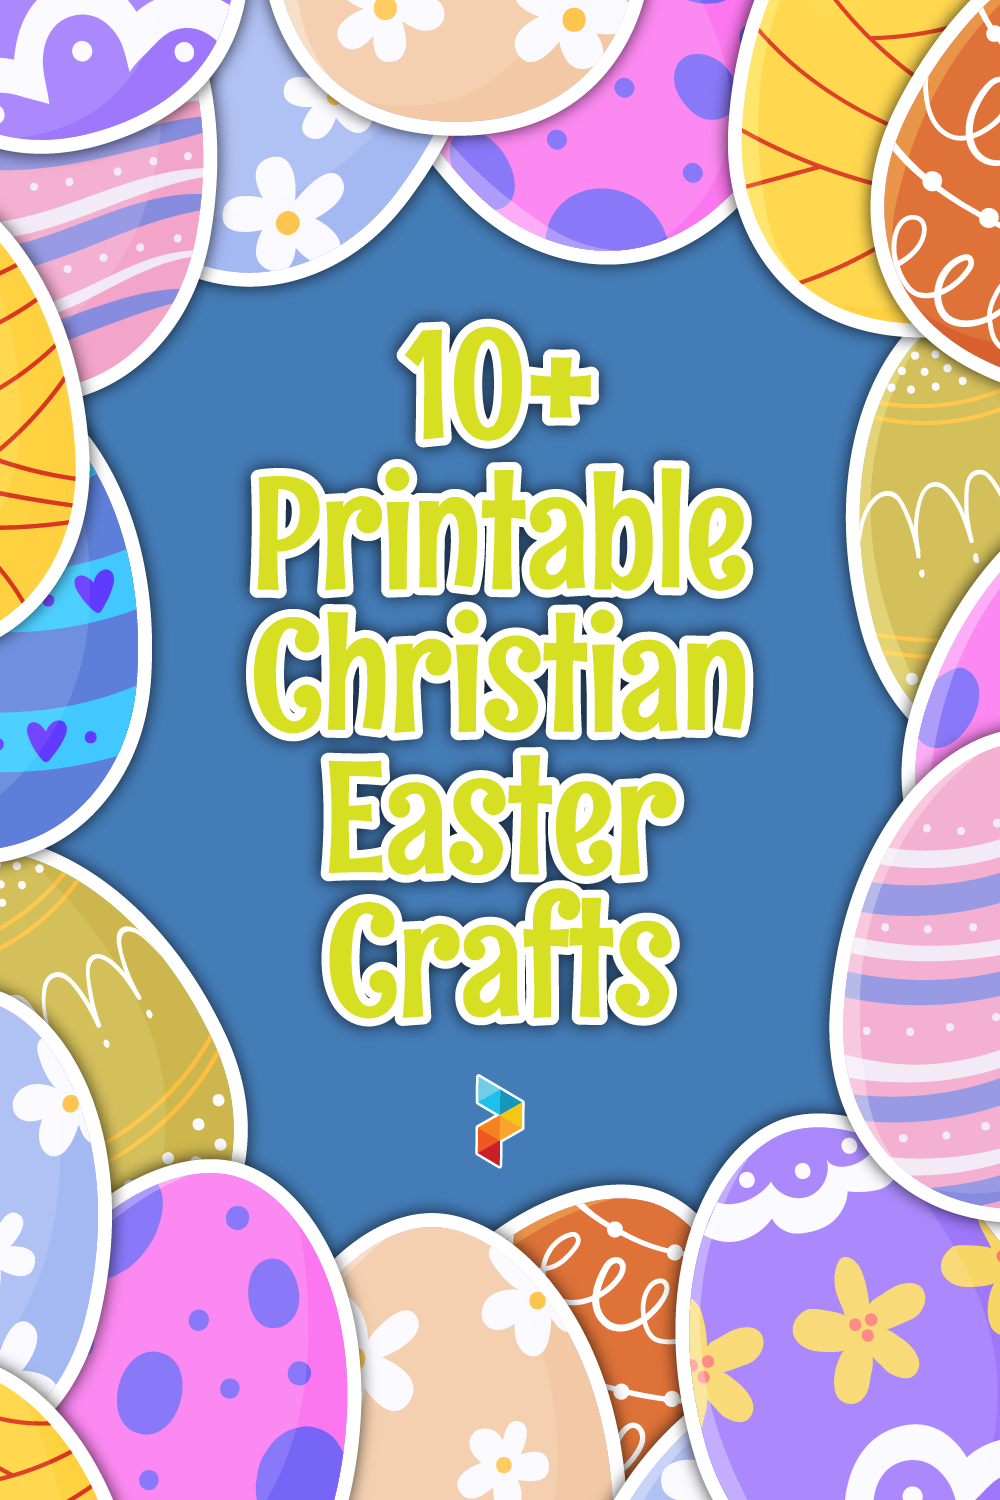 Christian Easter Crafts